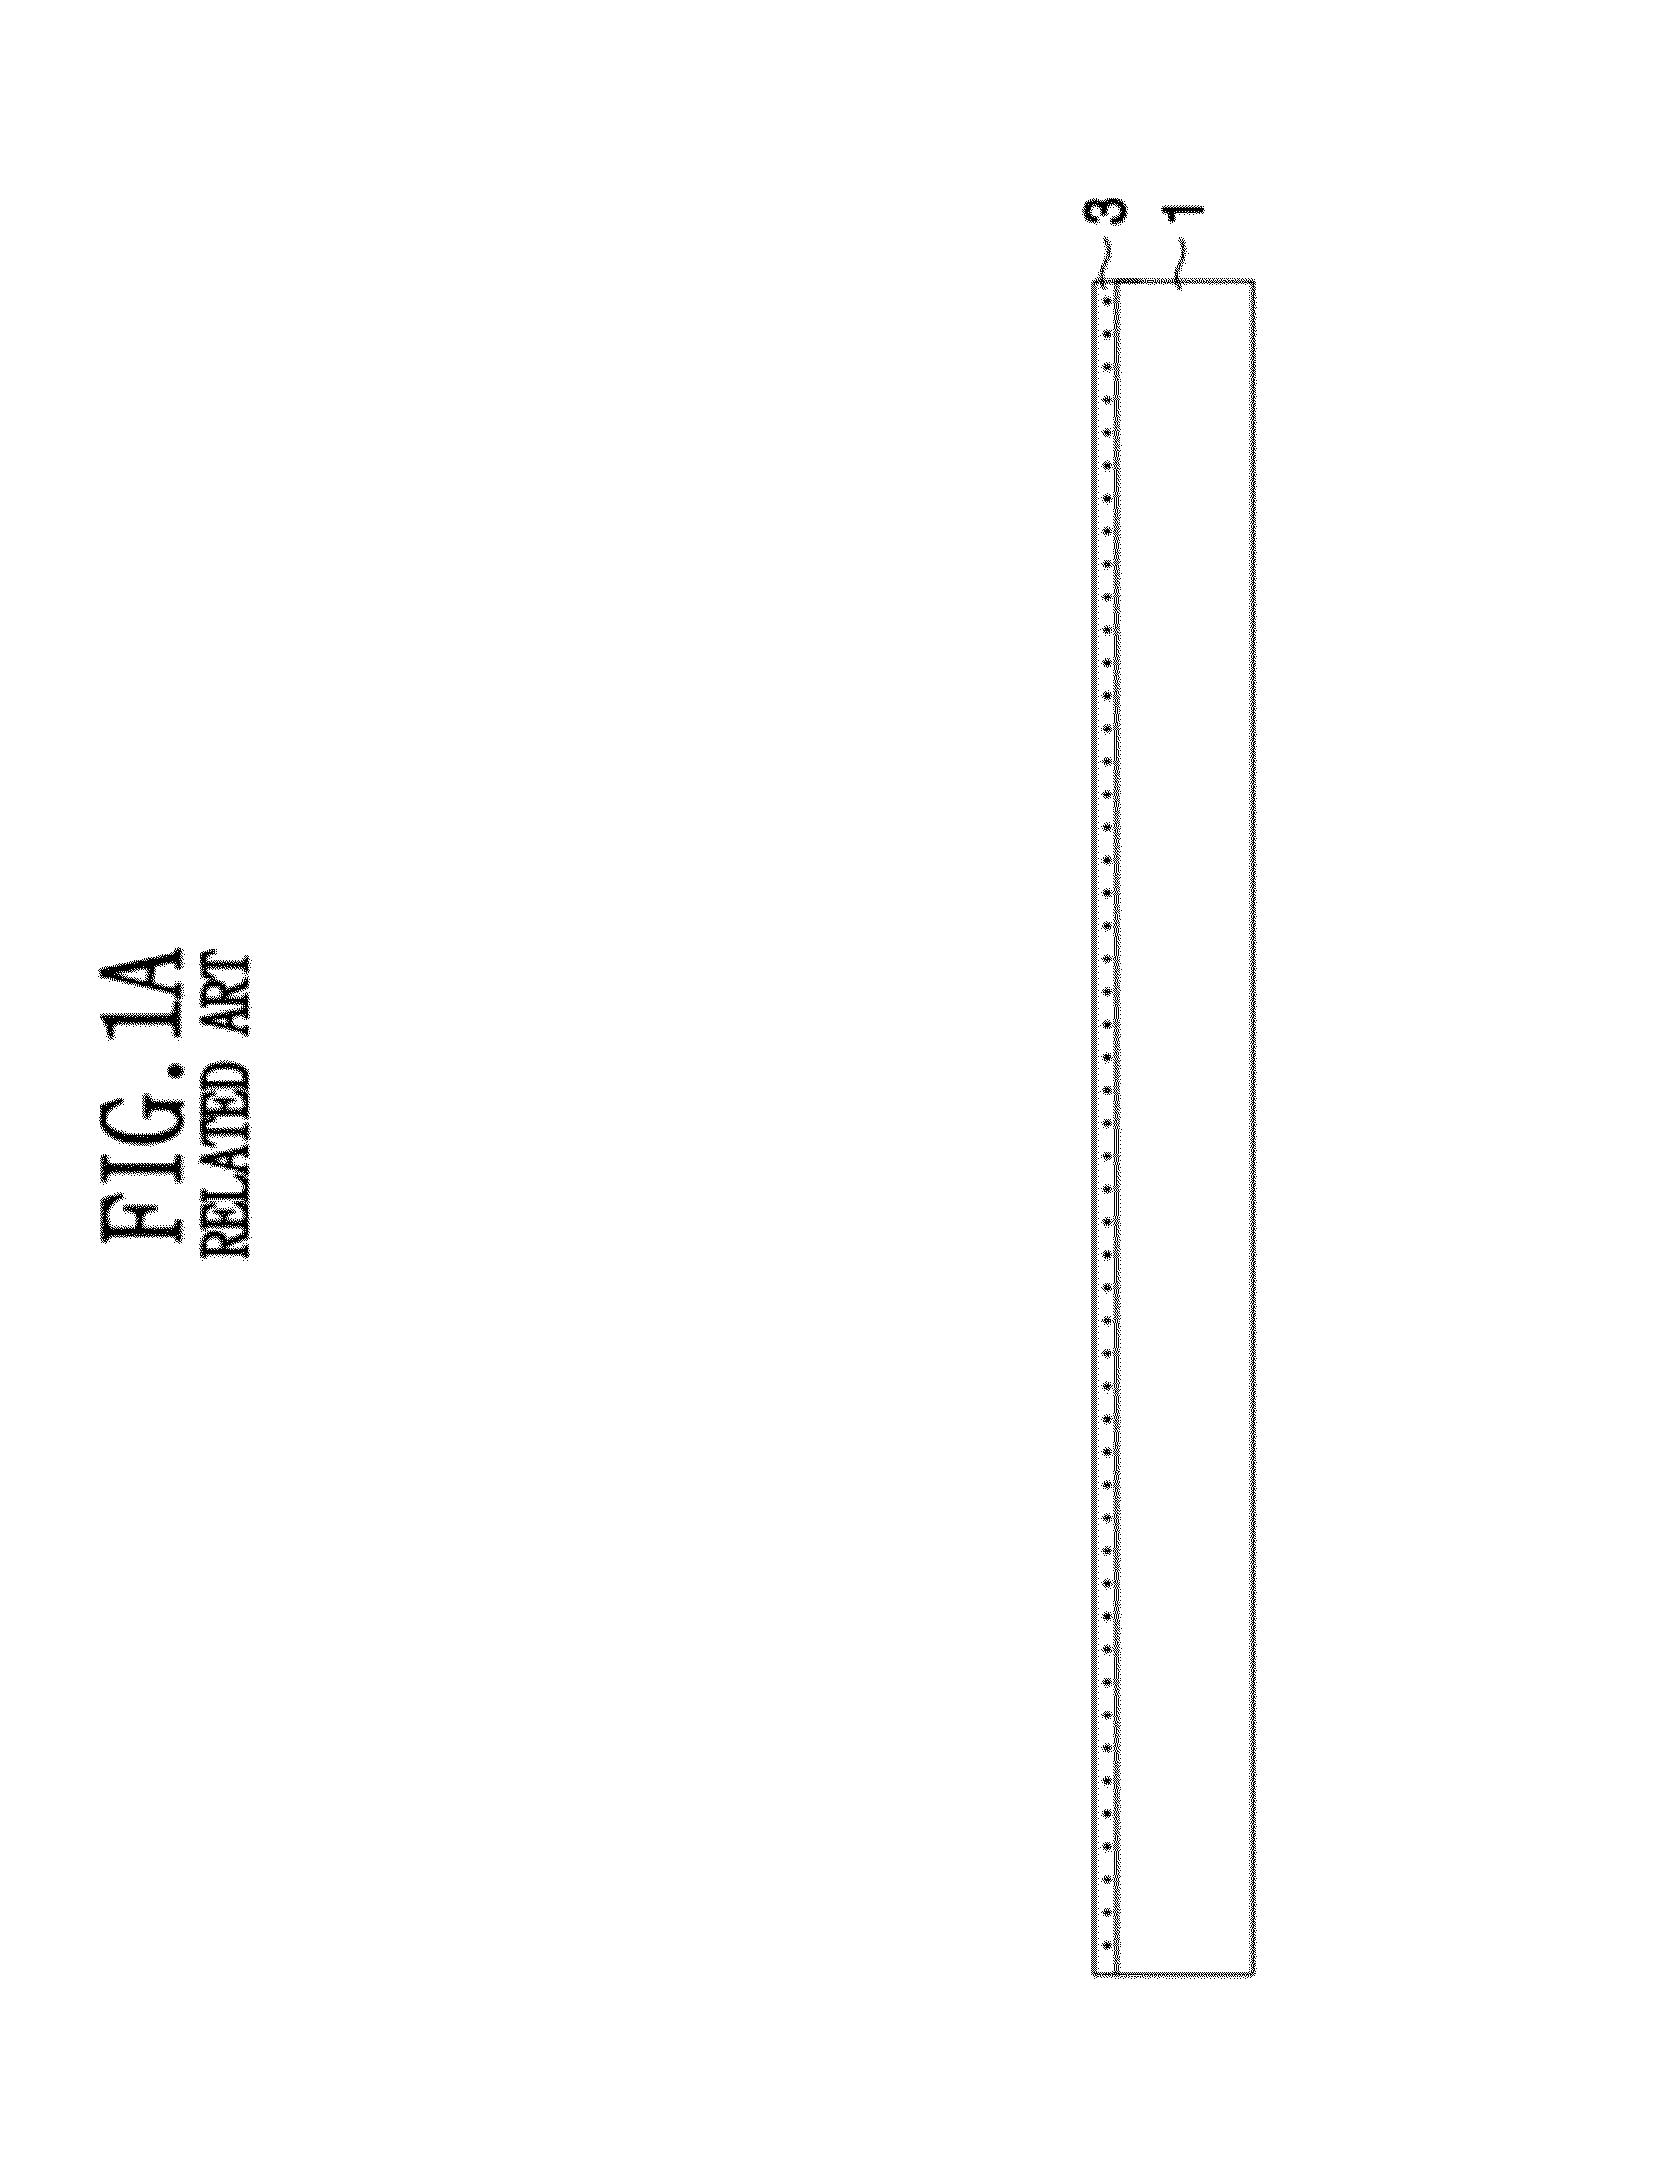 Method for manufacturing flexible display device having an insulative overcoat and flexible display device having the same